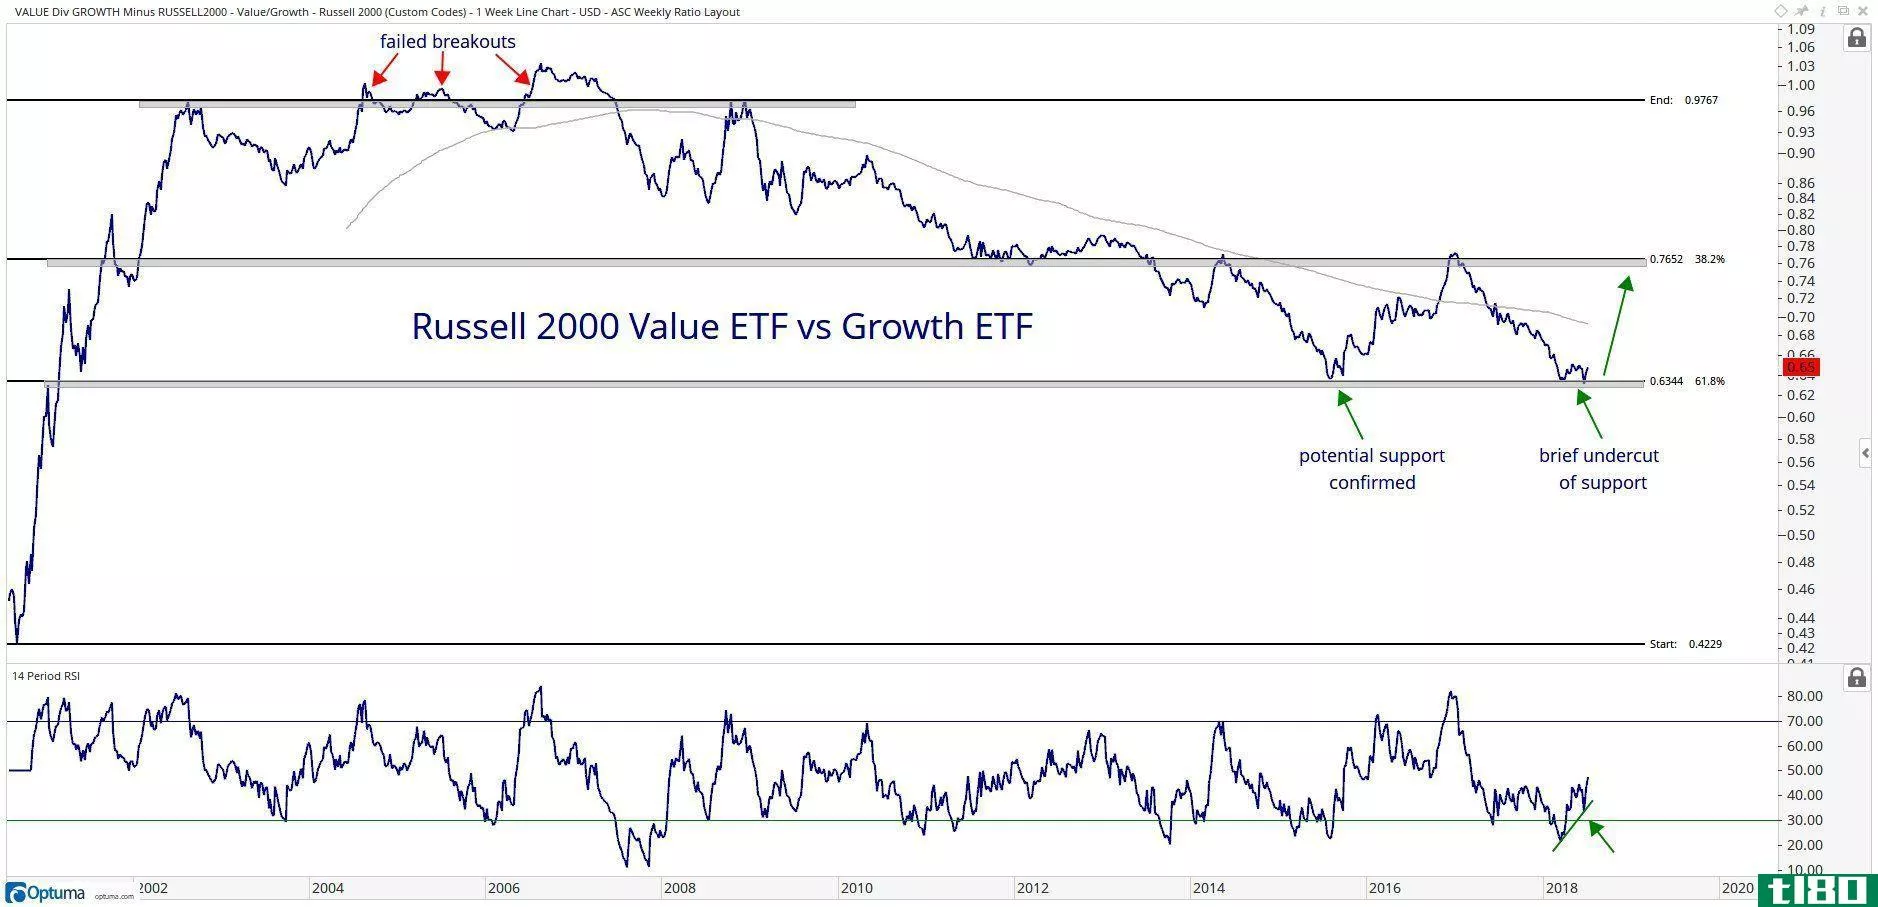 Chart showing the performance of the Russell 2000 value ETF vs. its growth counterpart